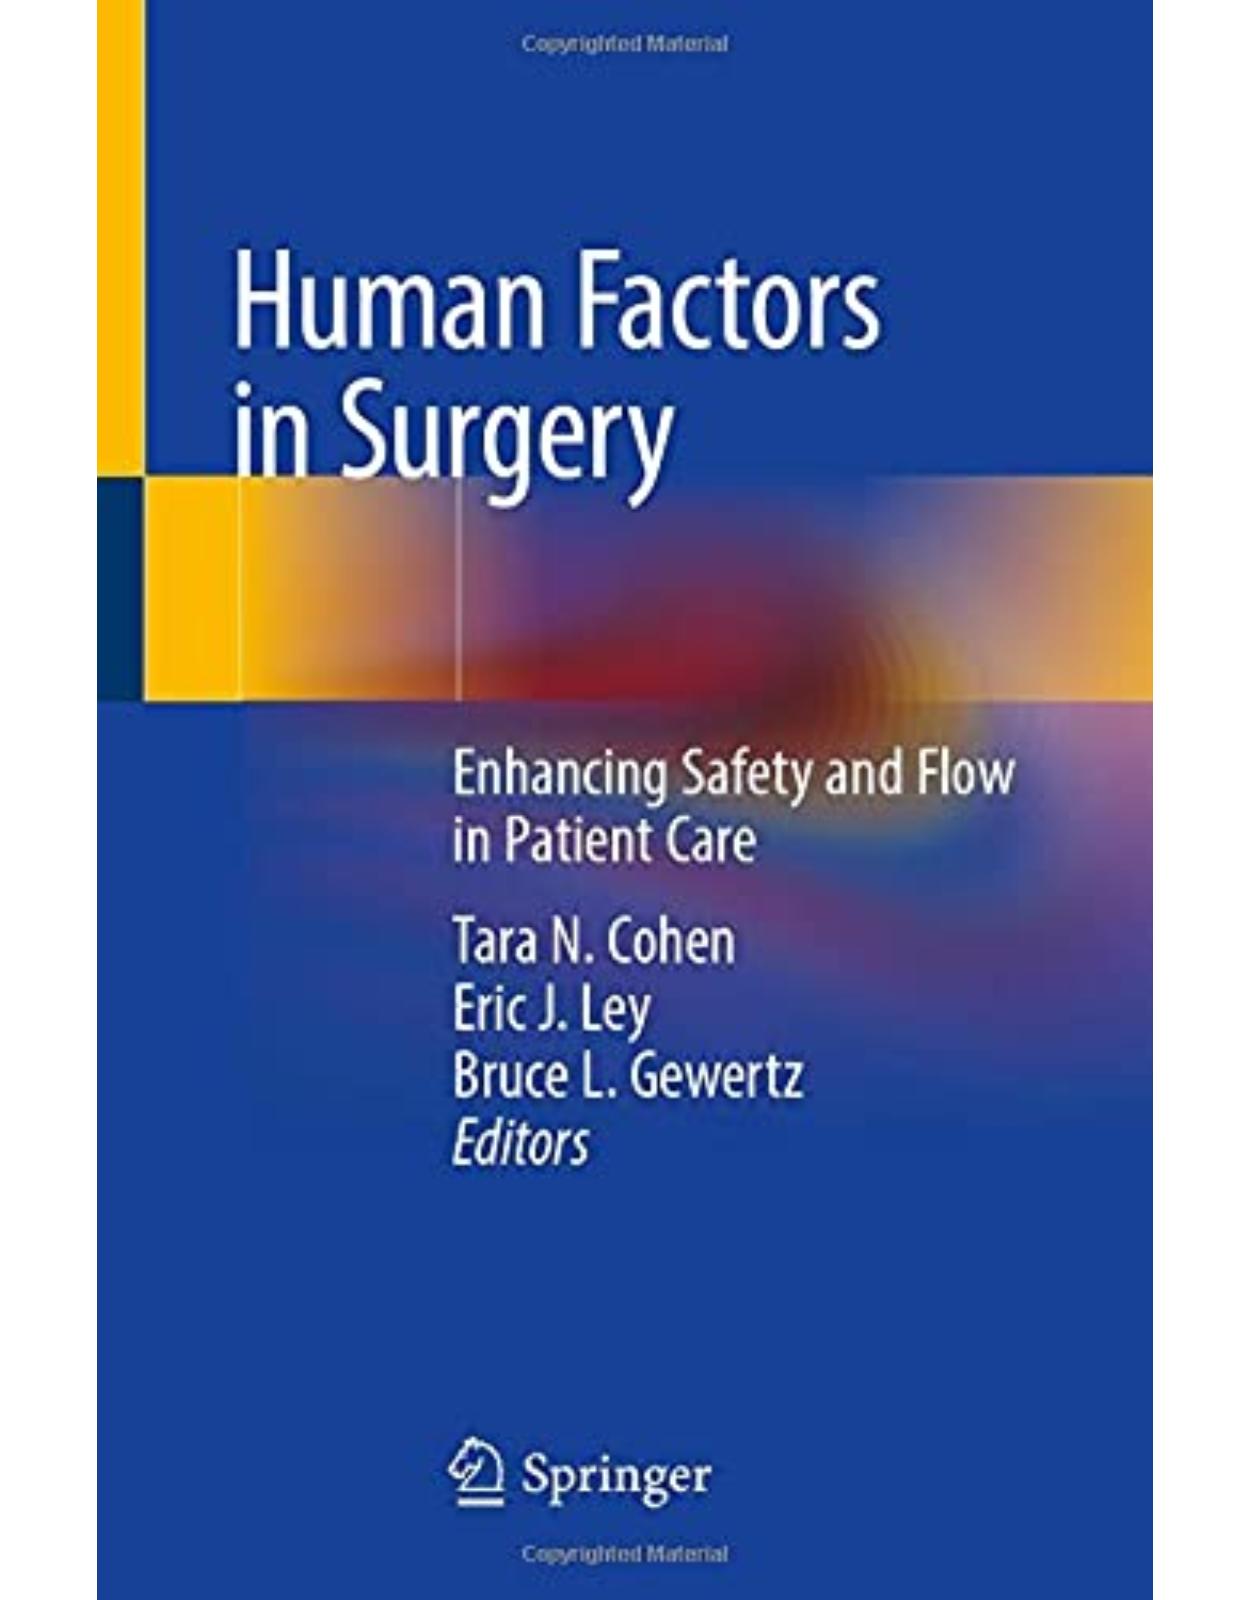 Human Factors in Surgery: Enhancing Safety and Flow in Patient Care 